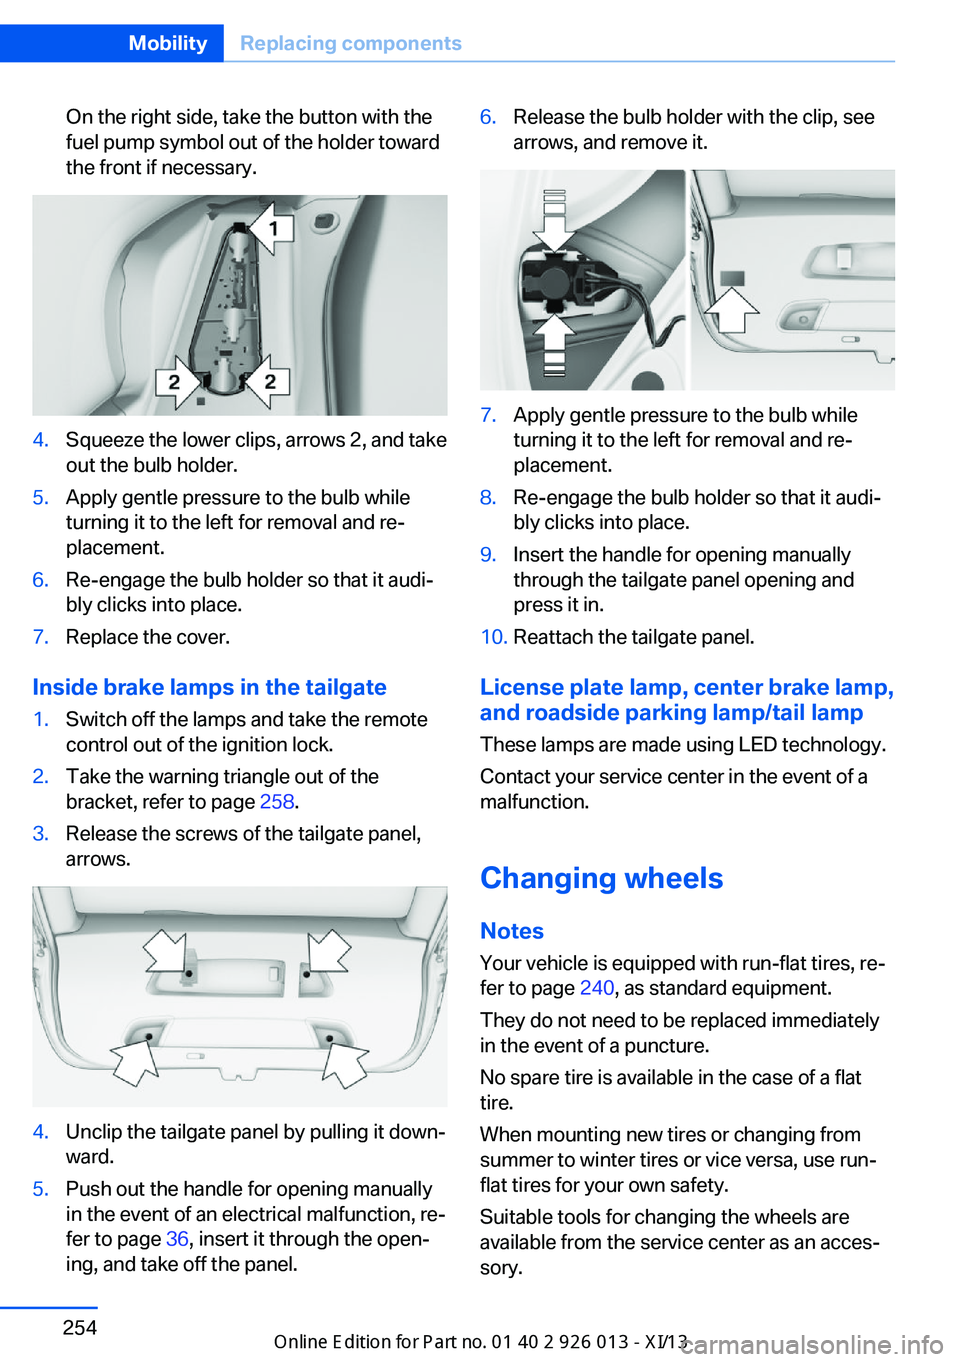 BMW X1 2013 E84 Owners Manual On the right side, take the button with the
fuel pump symbol out of the holder toward
the front if necessary.4.Squeeze the lower clips, arrows 2, and take
out the bulb holder.5.Apply gentle pressure t